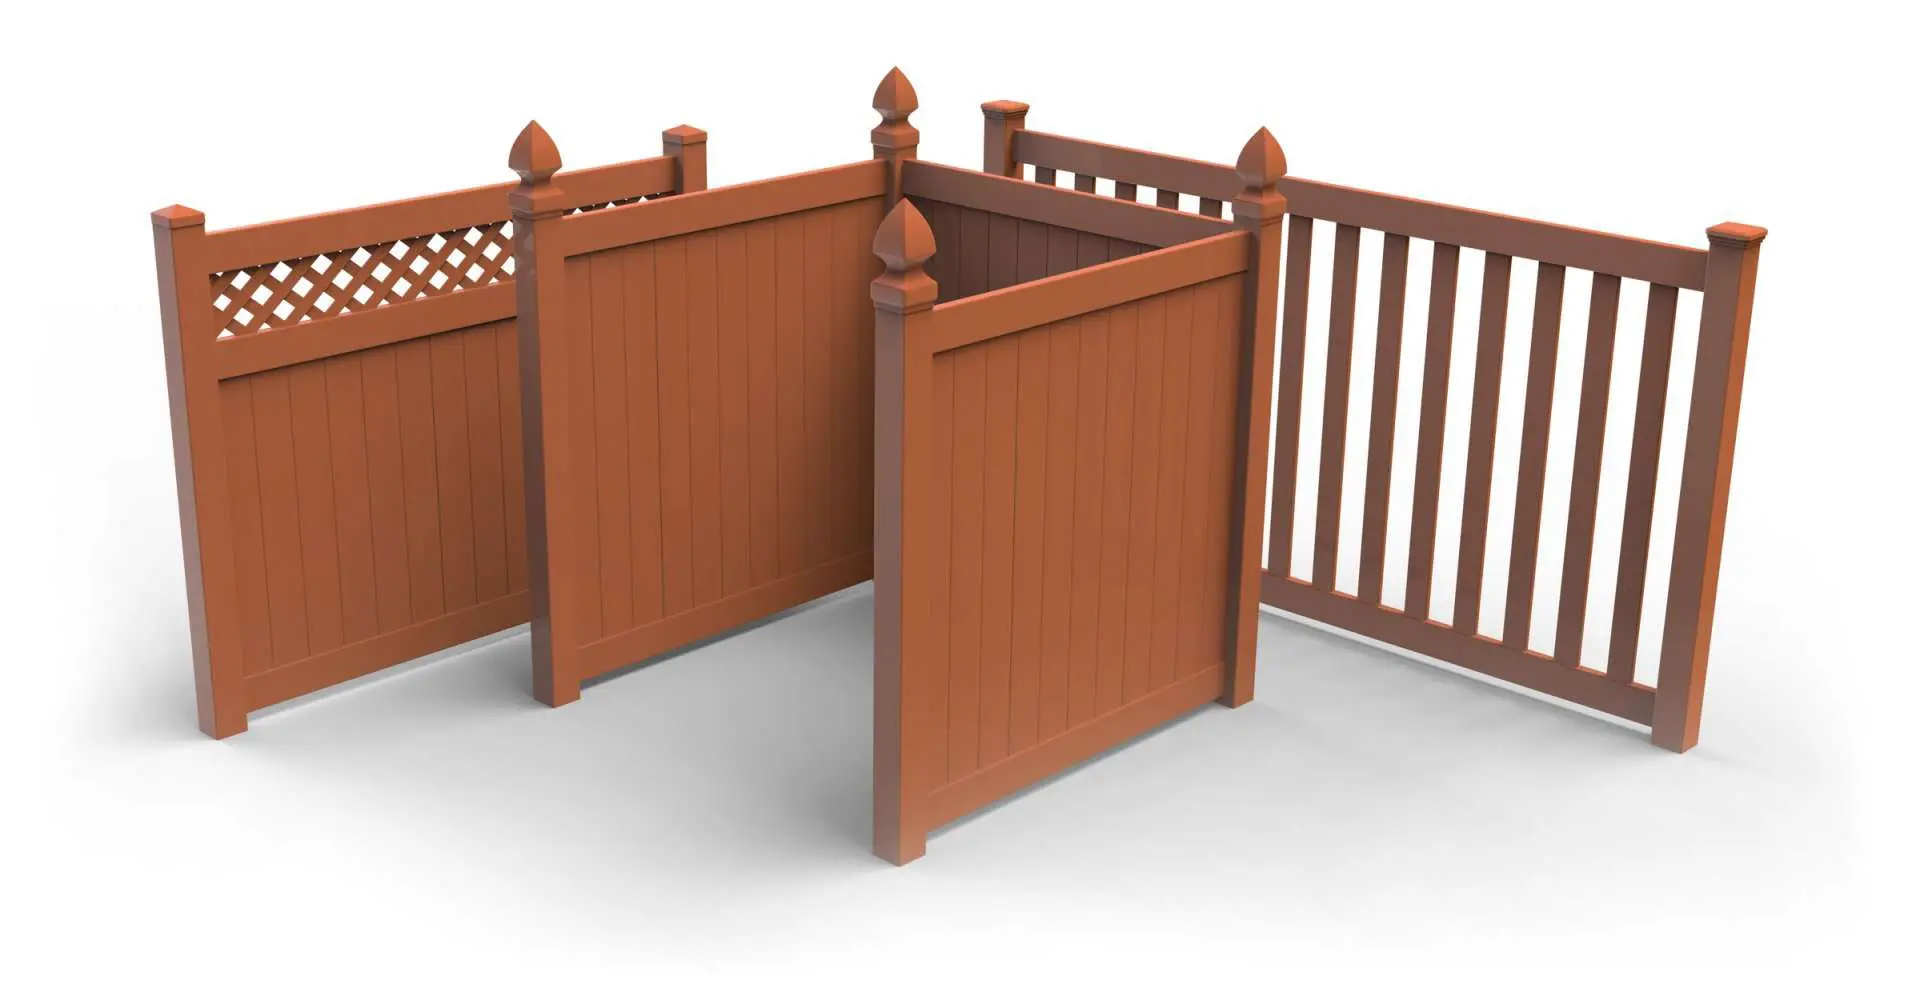 A wooden fence with a gate and planter.